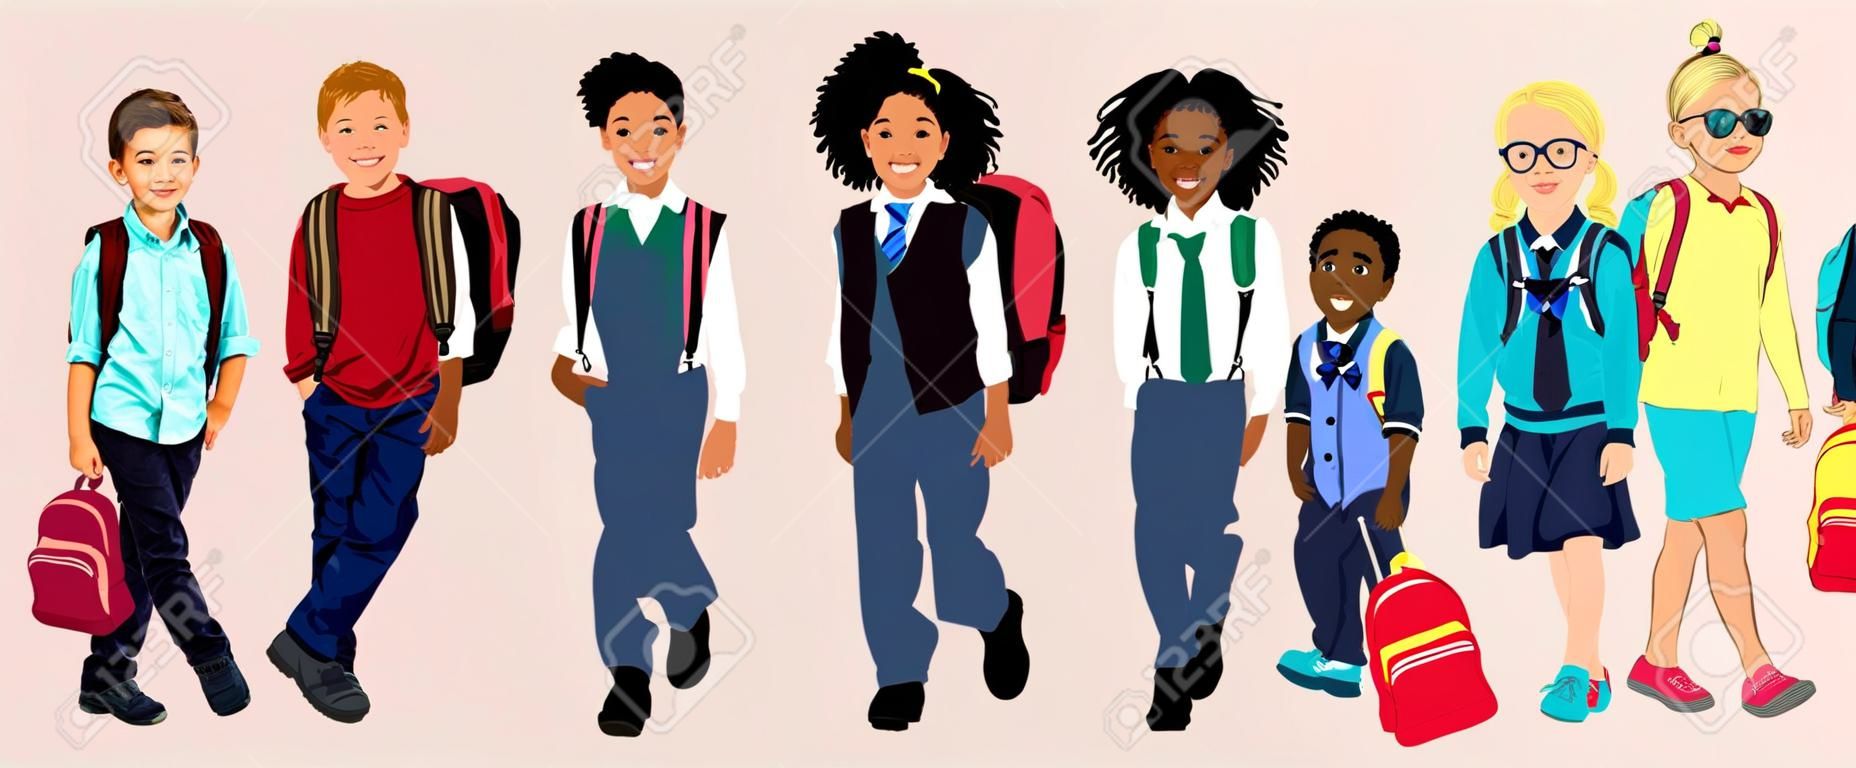 Set of boys and girls going to elementary or middle school vector illustration with backpack or bag. happy pupils. Collection of children of different races and nationalities.